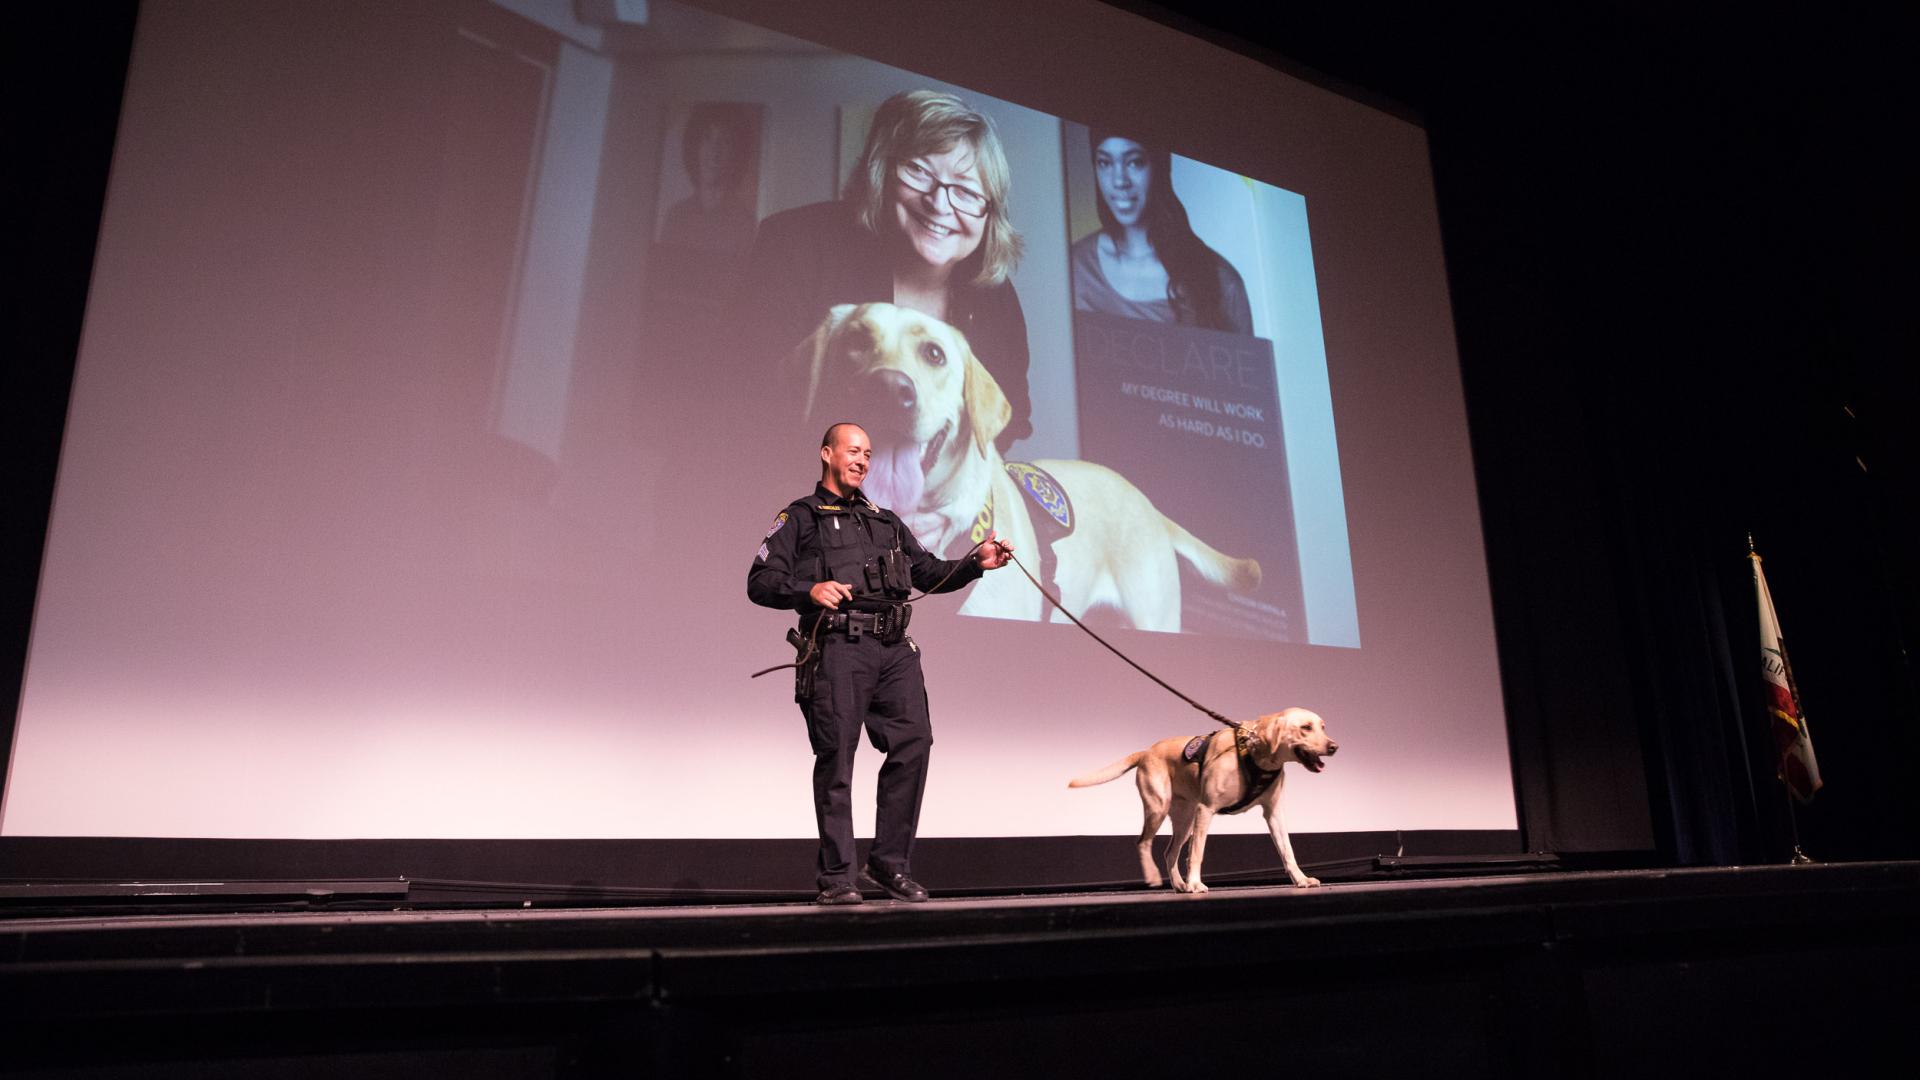 Avery the detection dog makes an appearance on stage